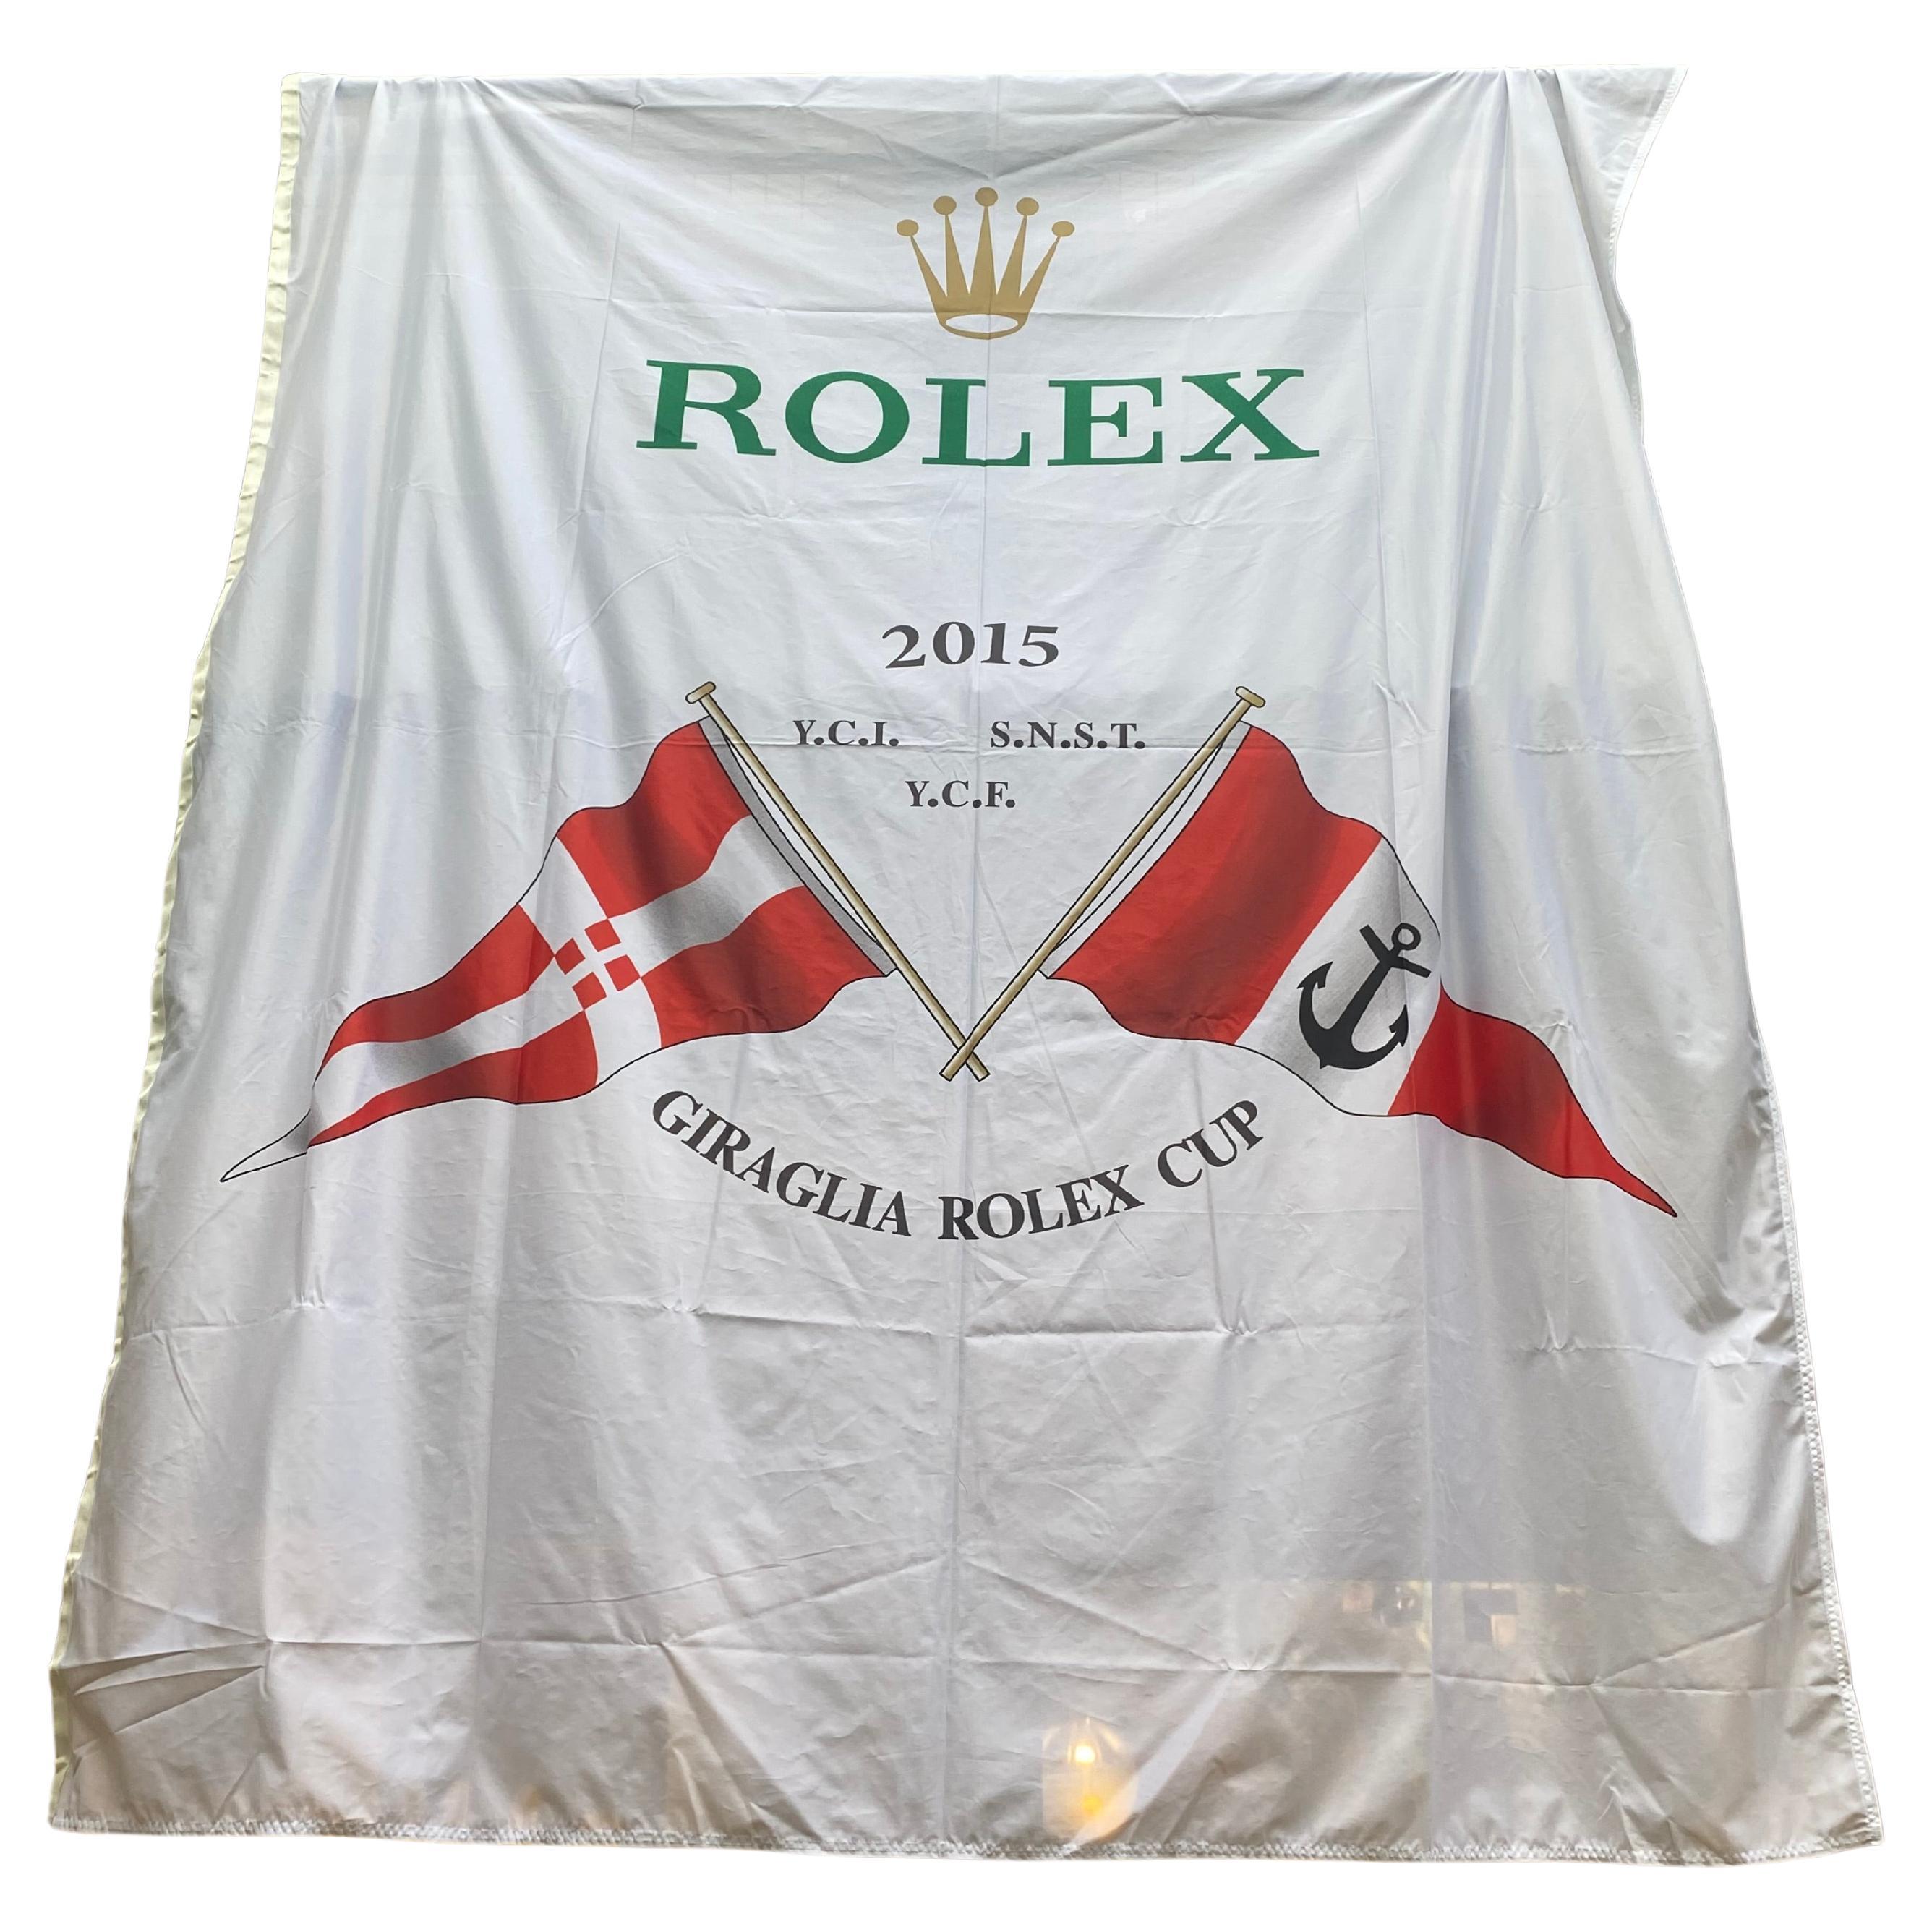 Rolex Large nylon flag For the Rolex Cup Giraglia 2015 For Sale